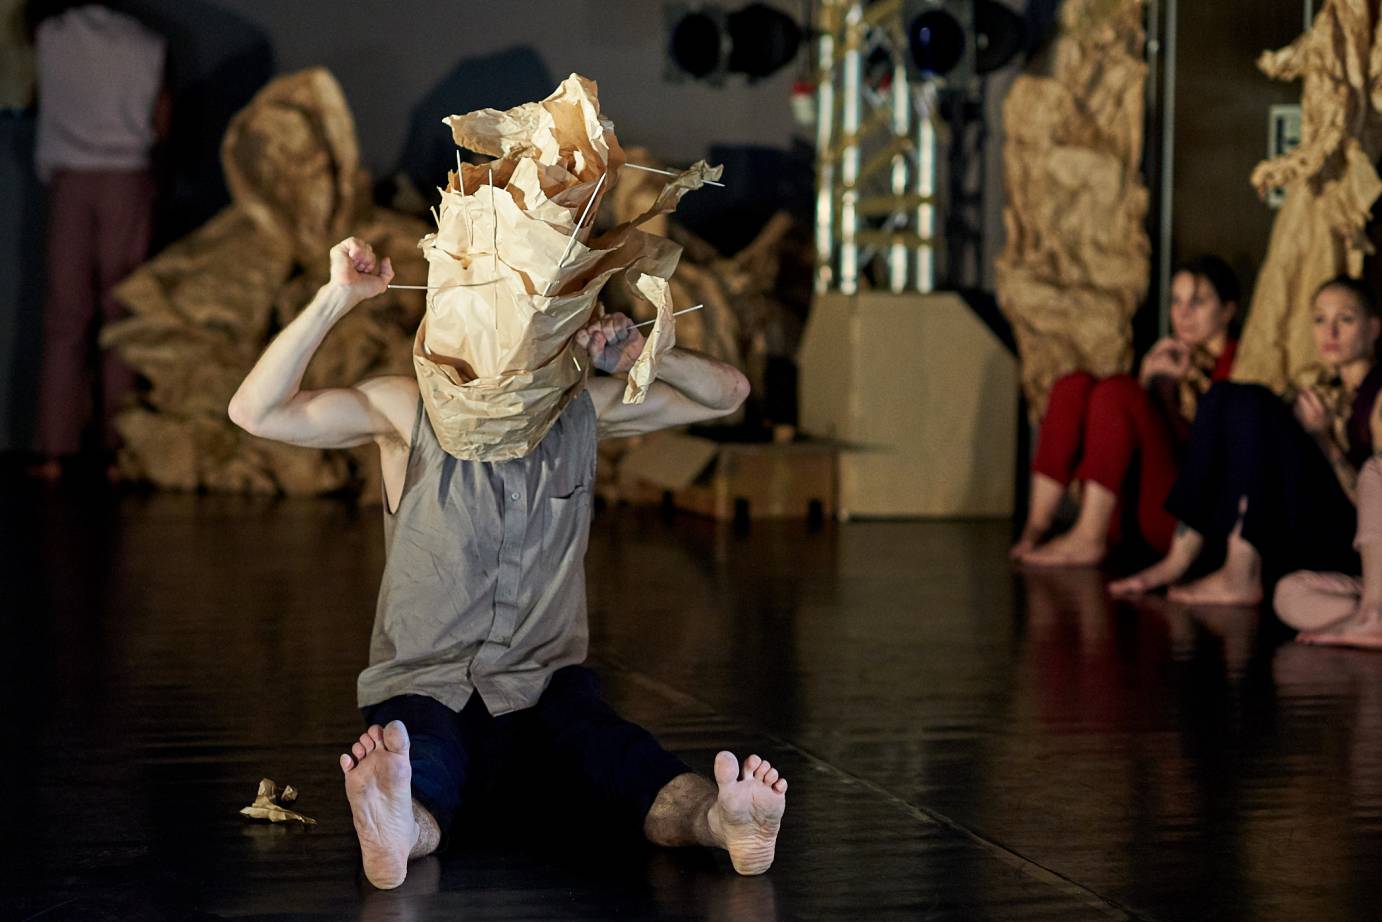 A man whose head is covered by a weird paper sculpture sits with his feet flexed